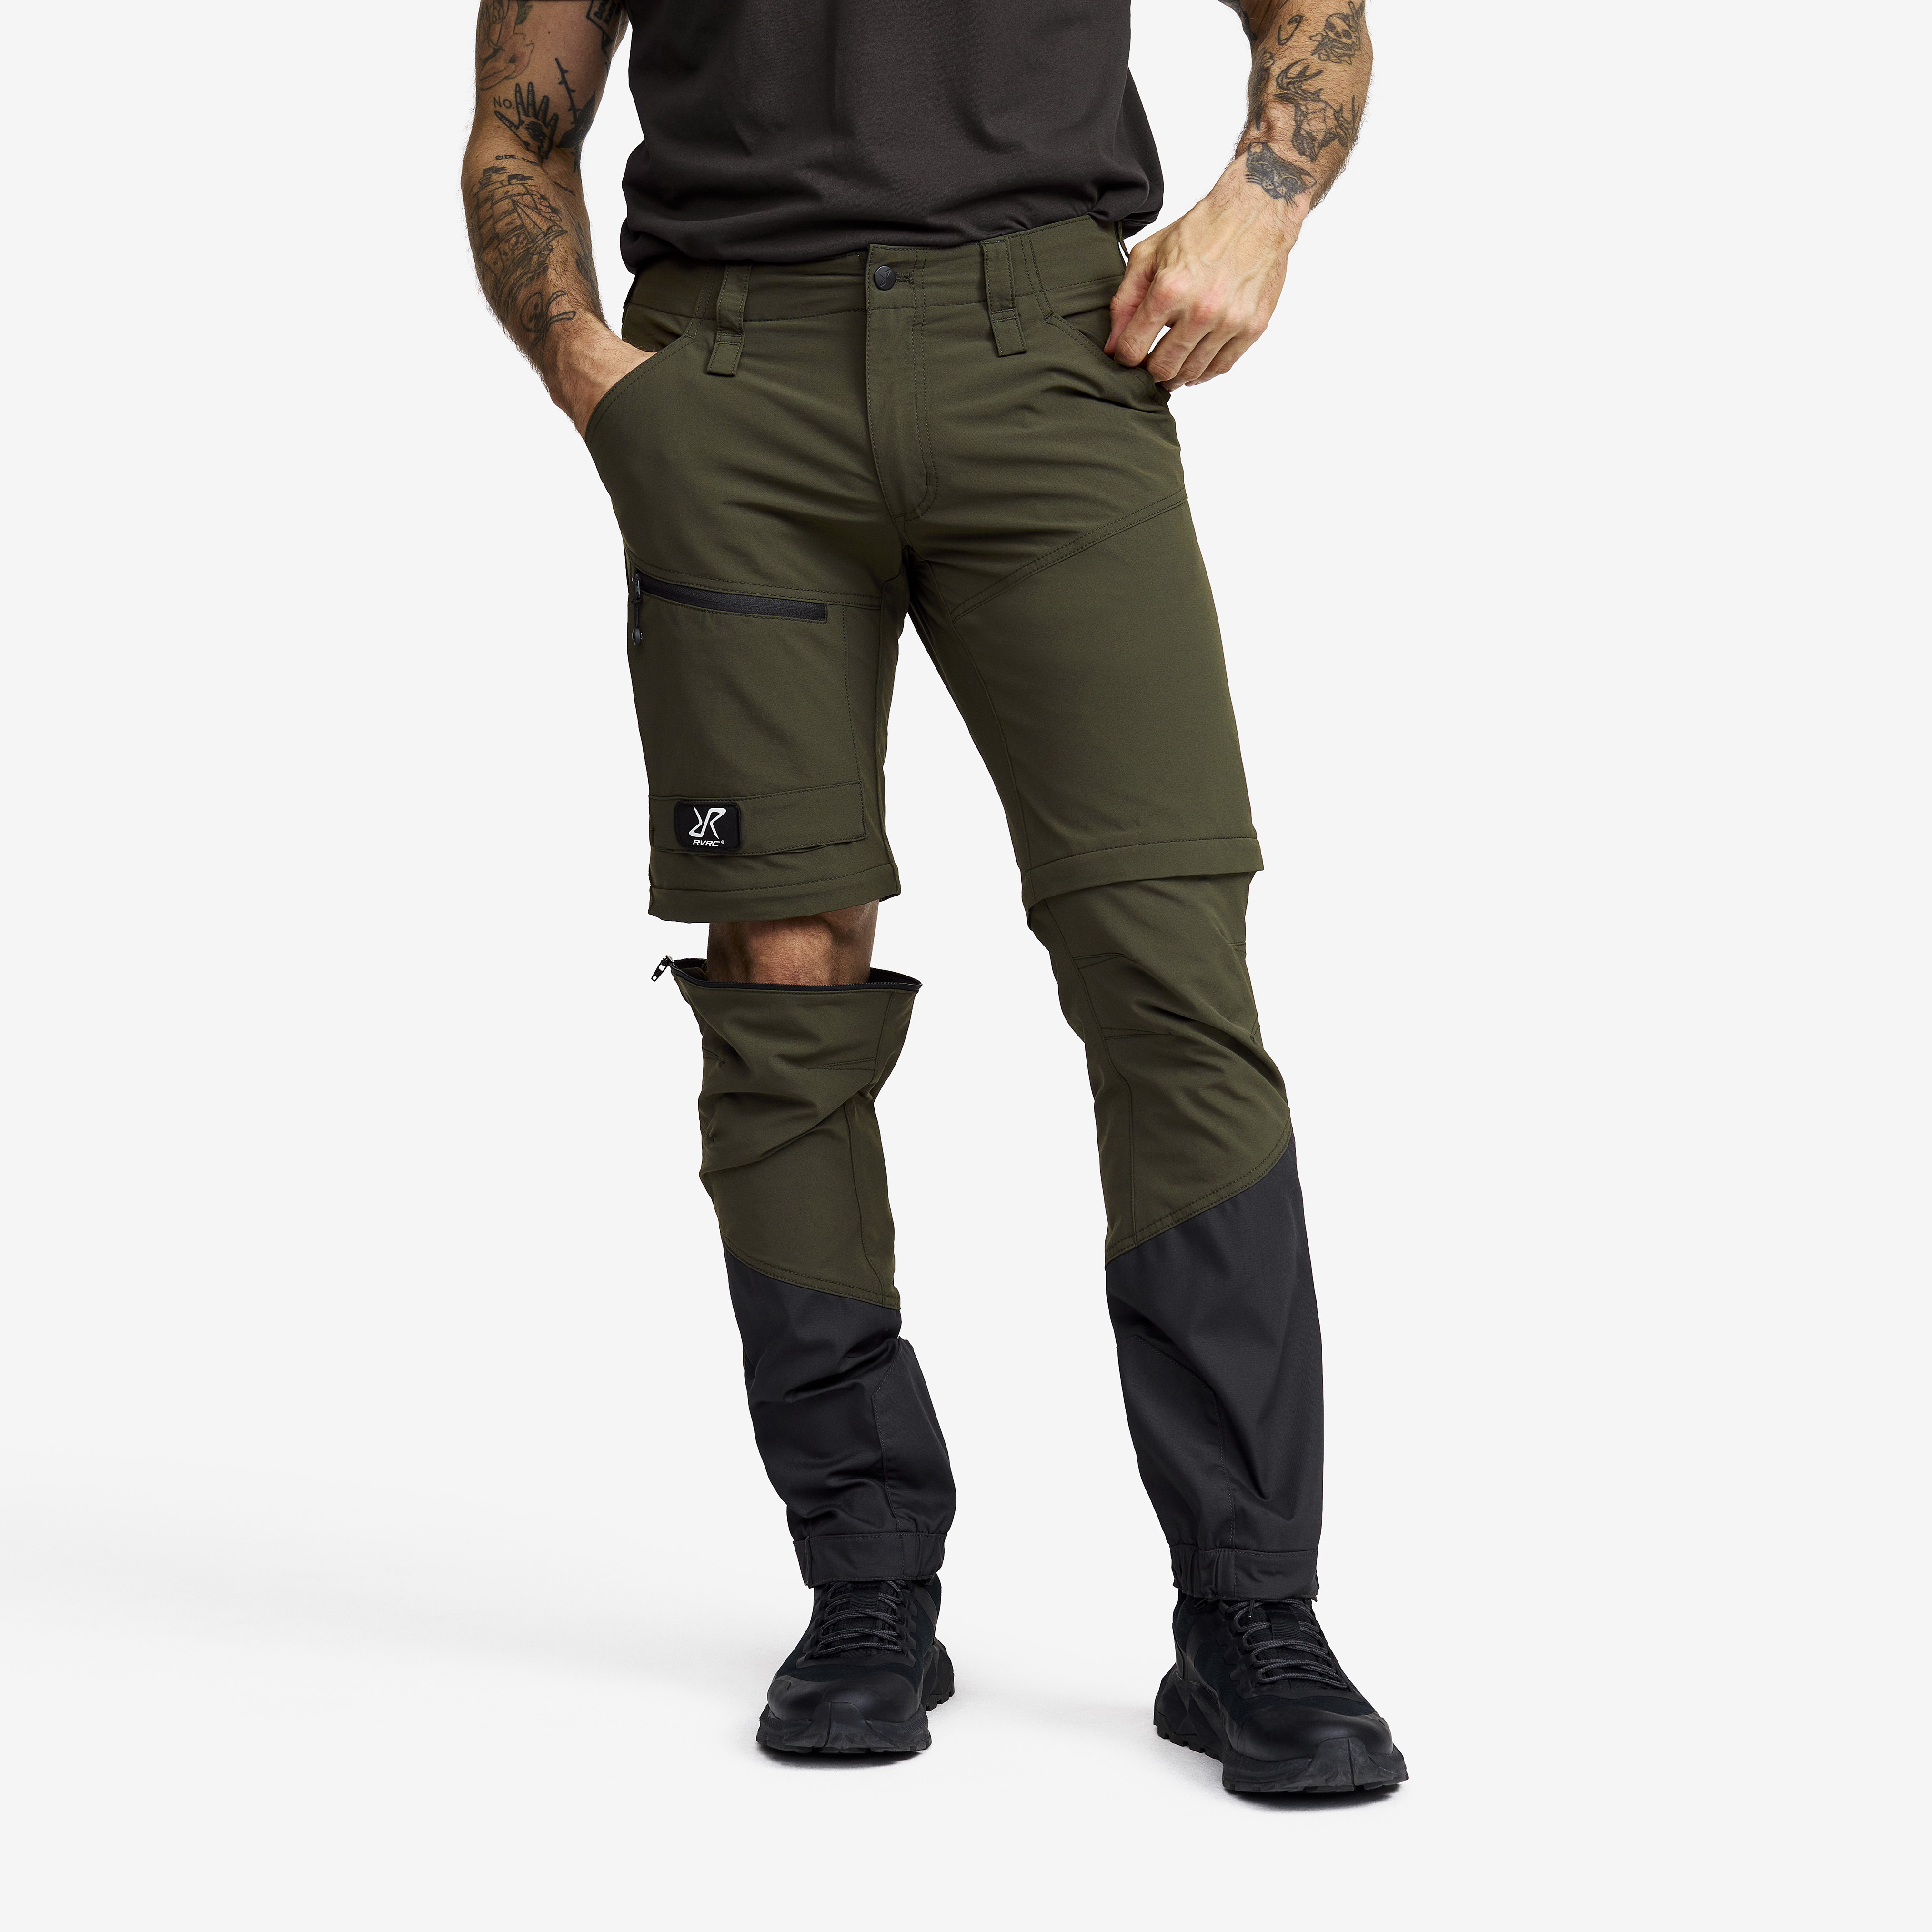 Range Pro Zip-off Trousers Forest night/Anthracite Men